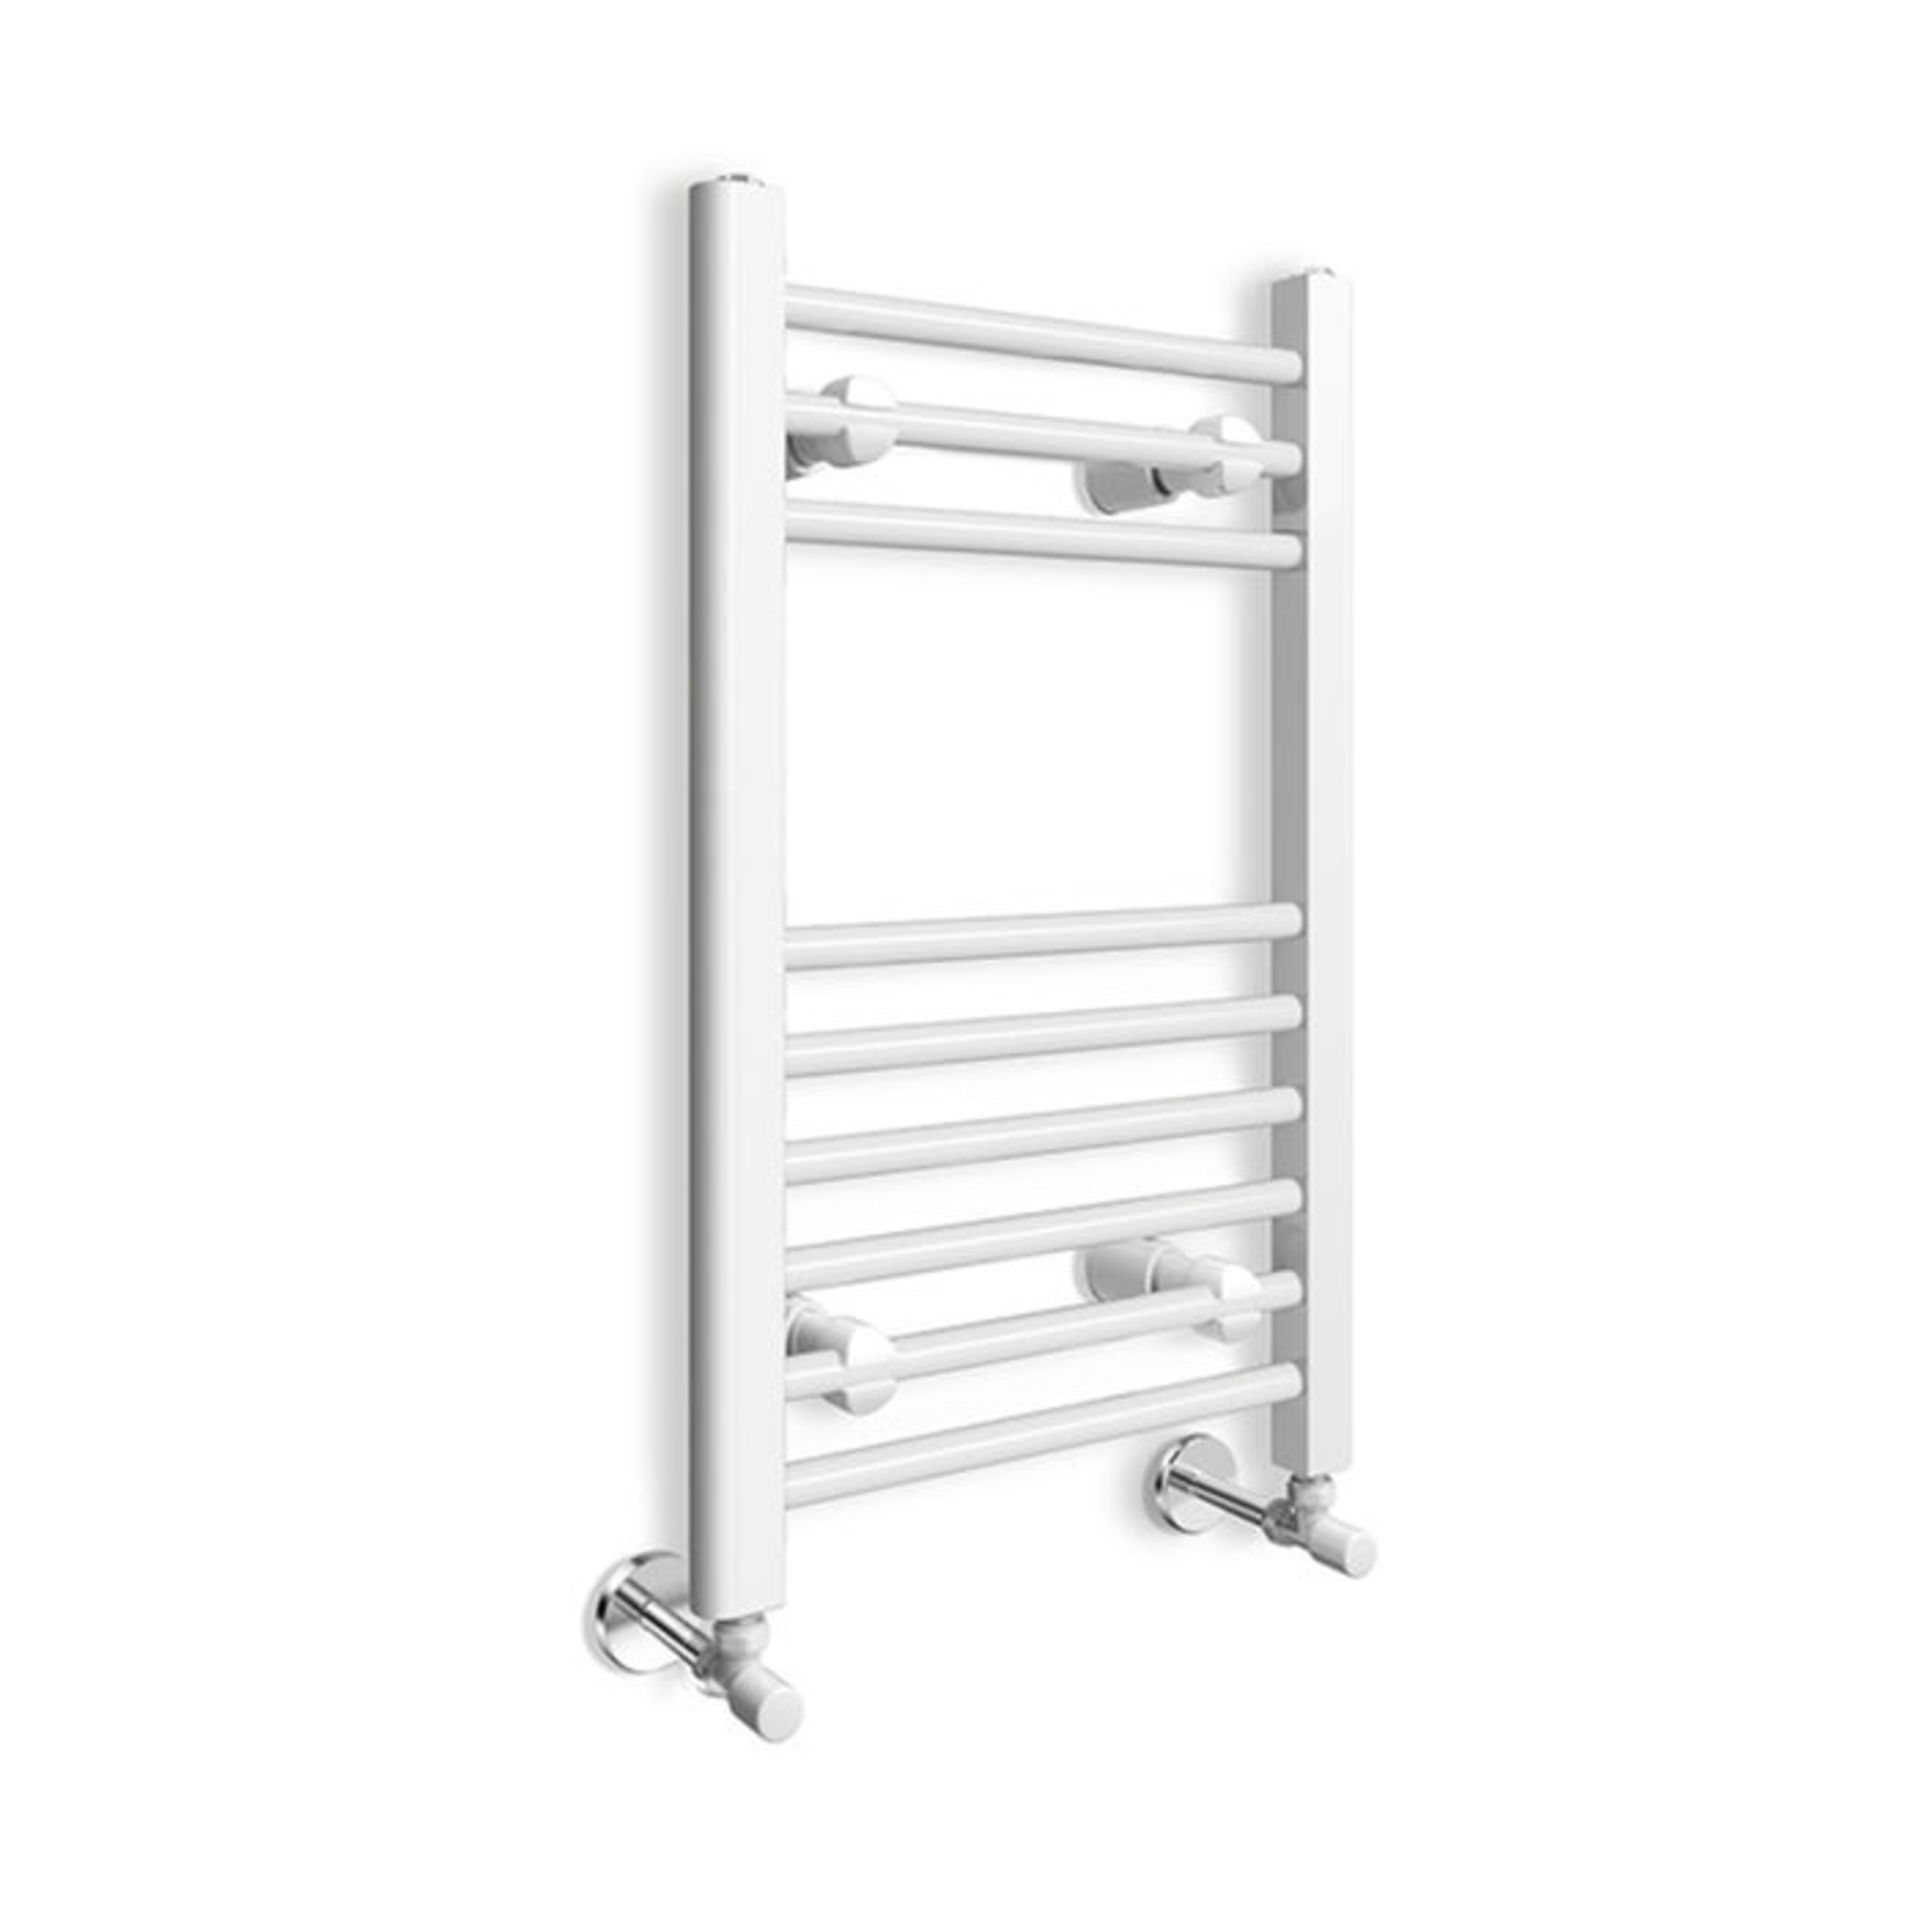 (ZL51) 650x400mm White Heated Towel Radiator. Made from low carbon steel Finished with a high